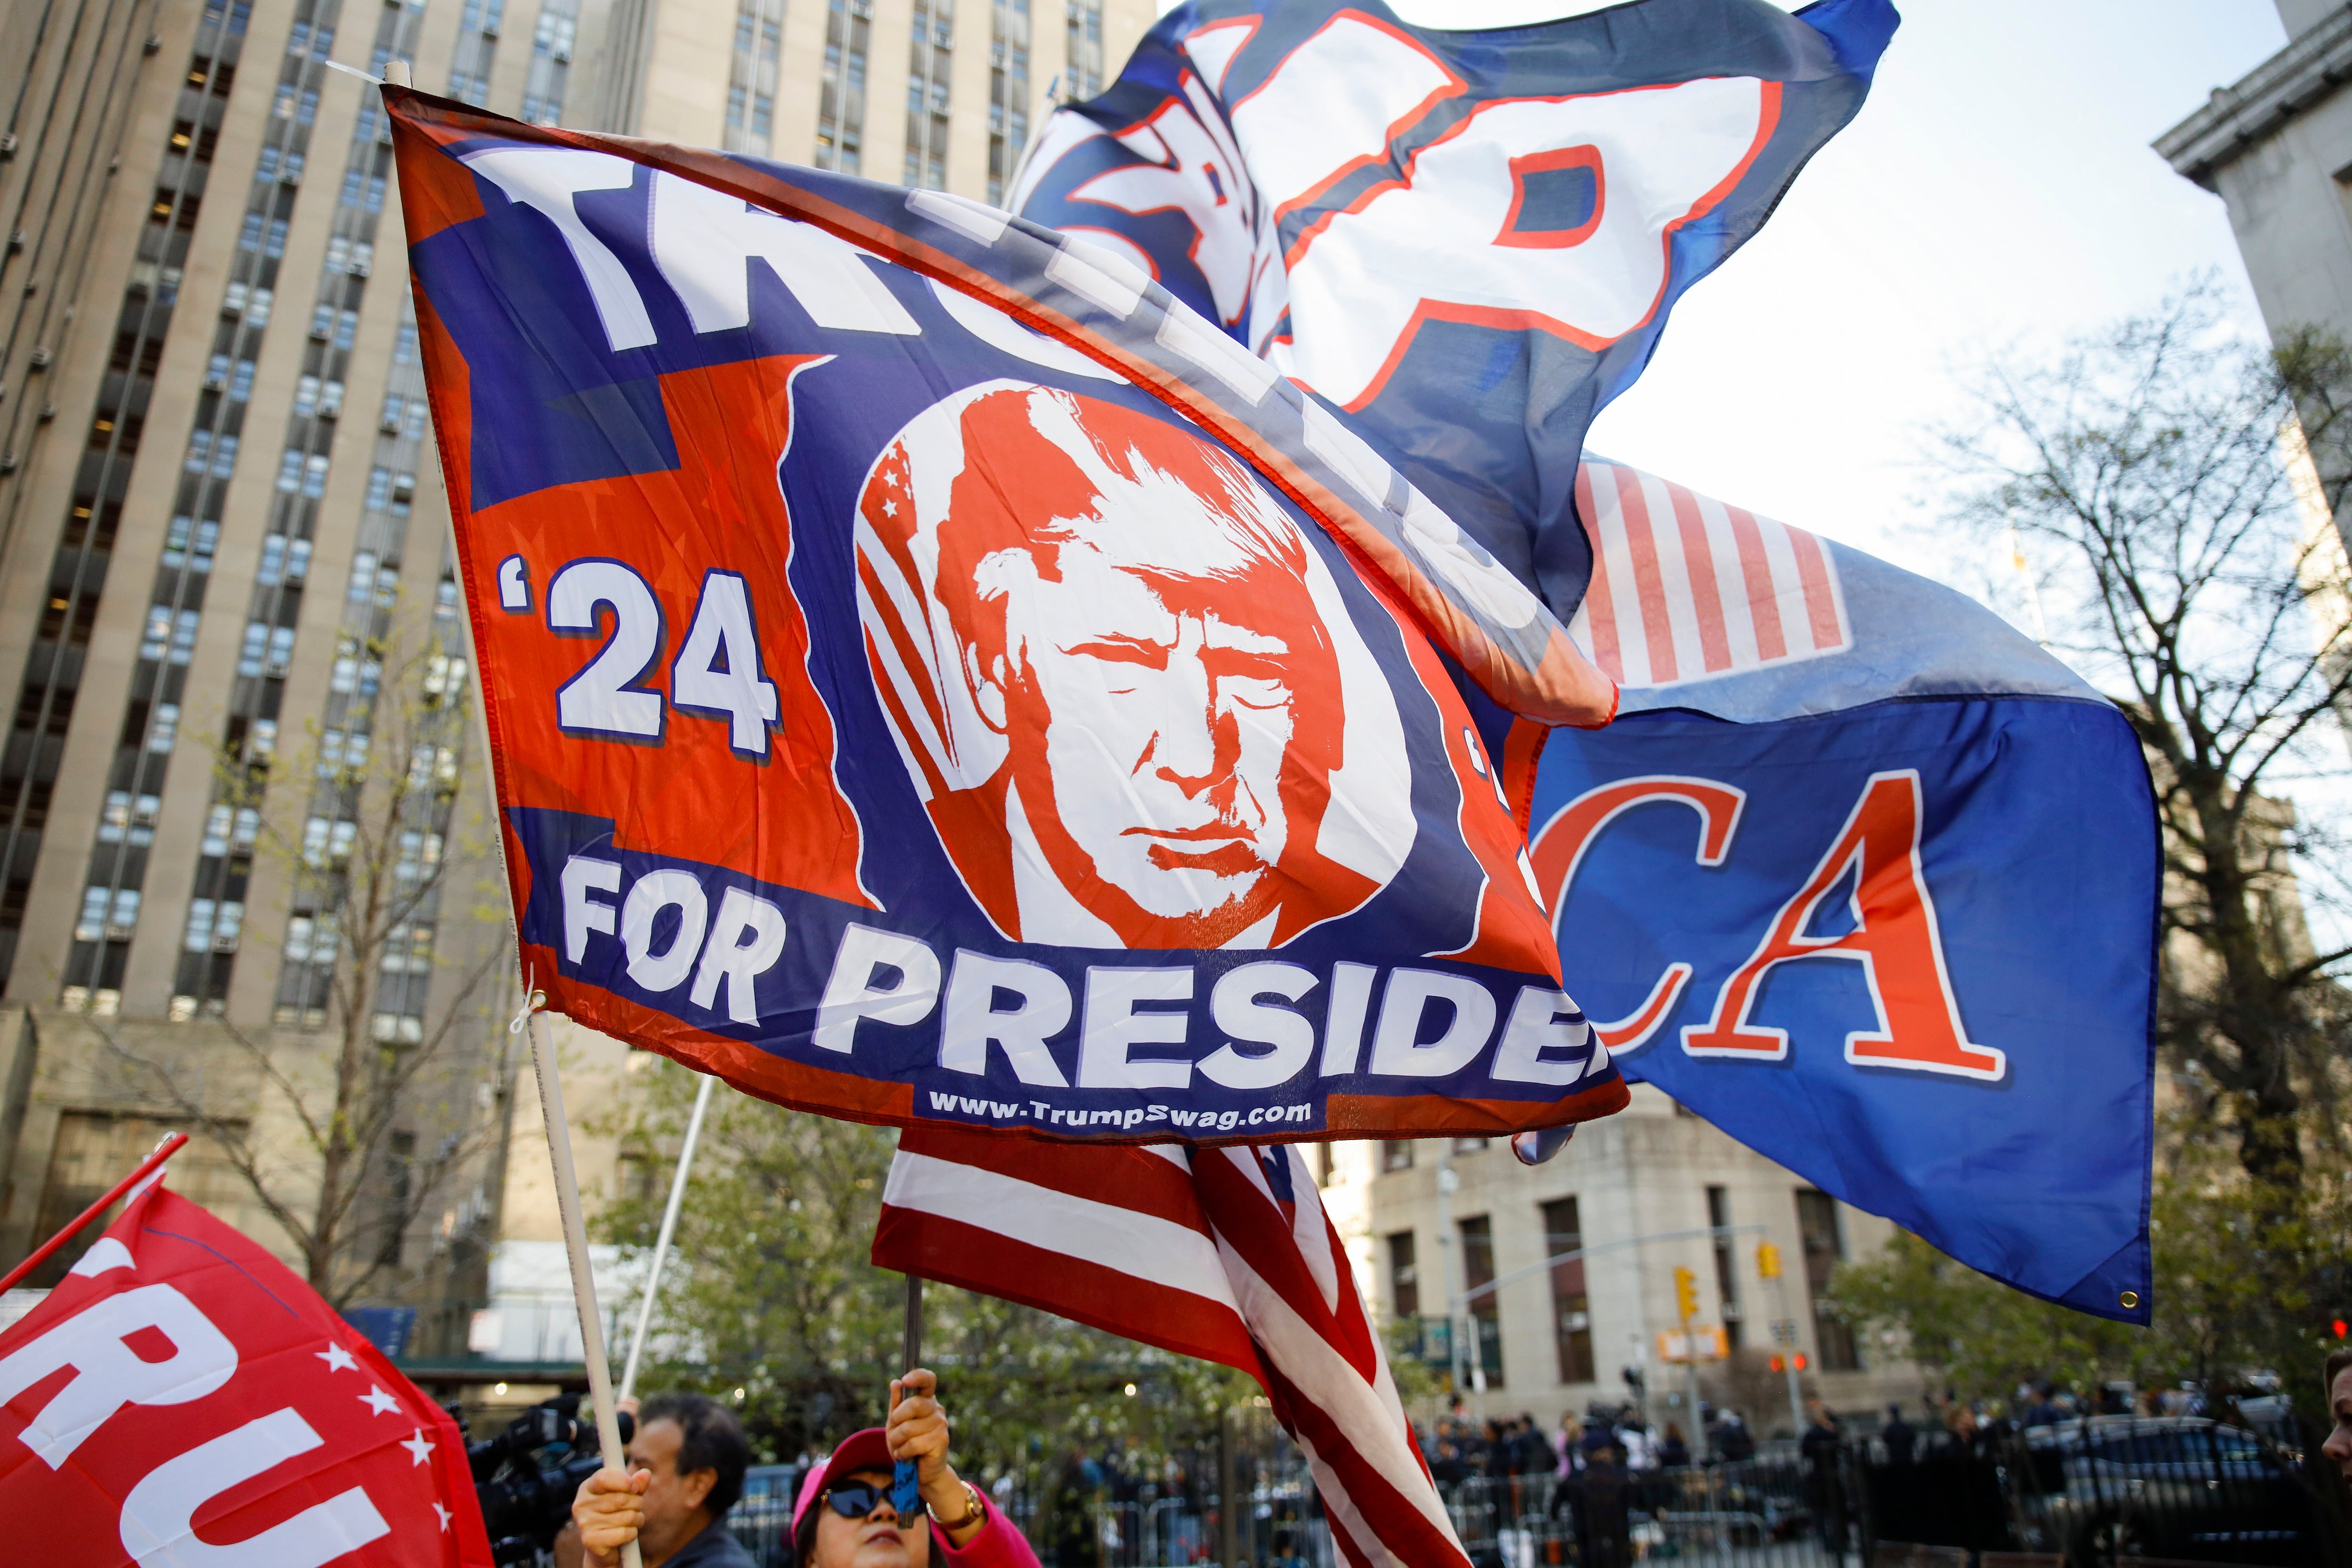 Donald Trump’s supporters display banners of support in front of the Manhattan courthouse on Monday.